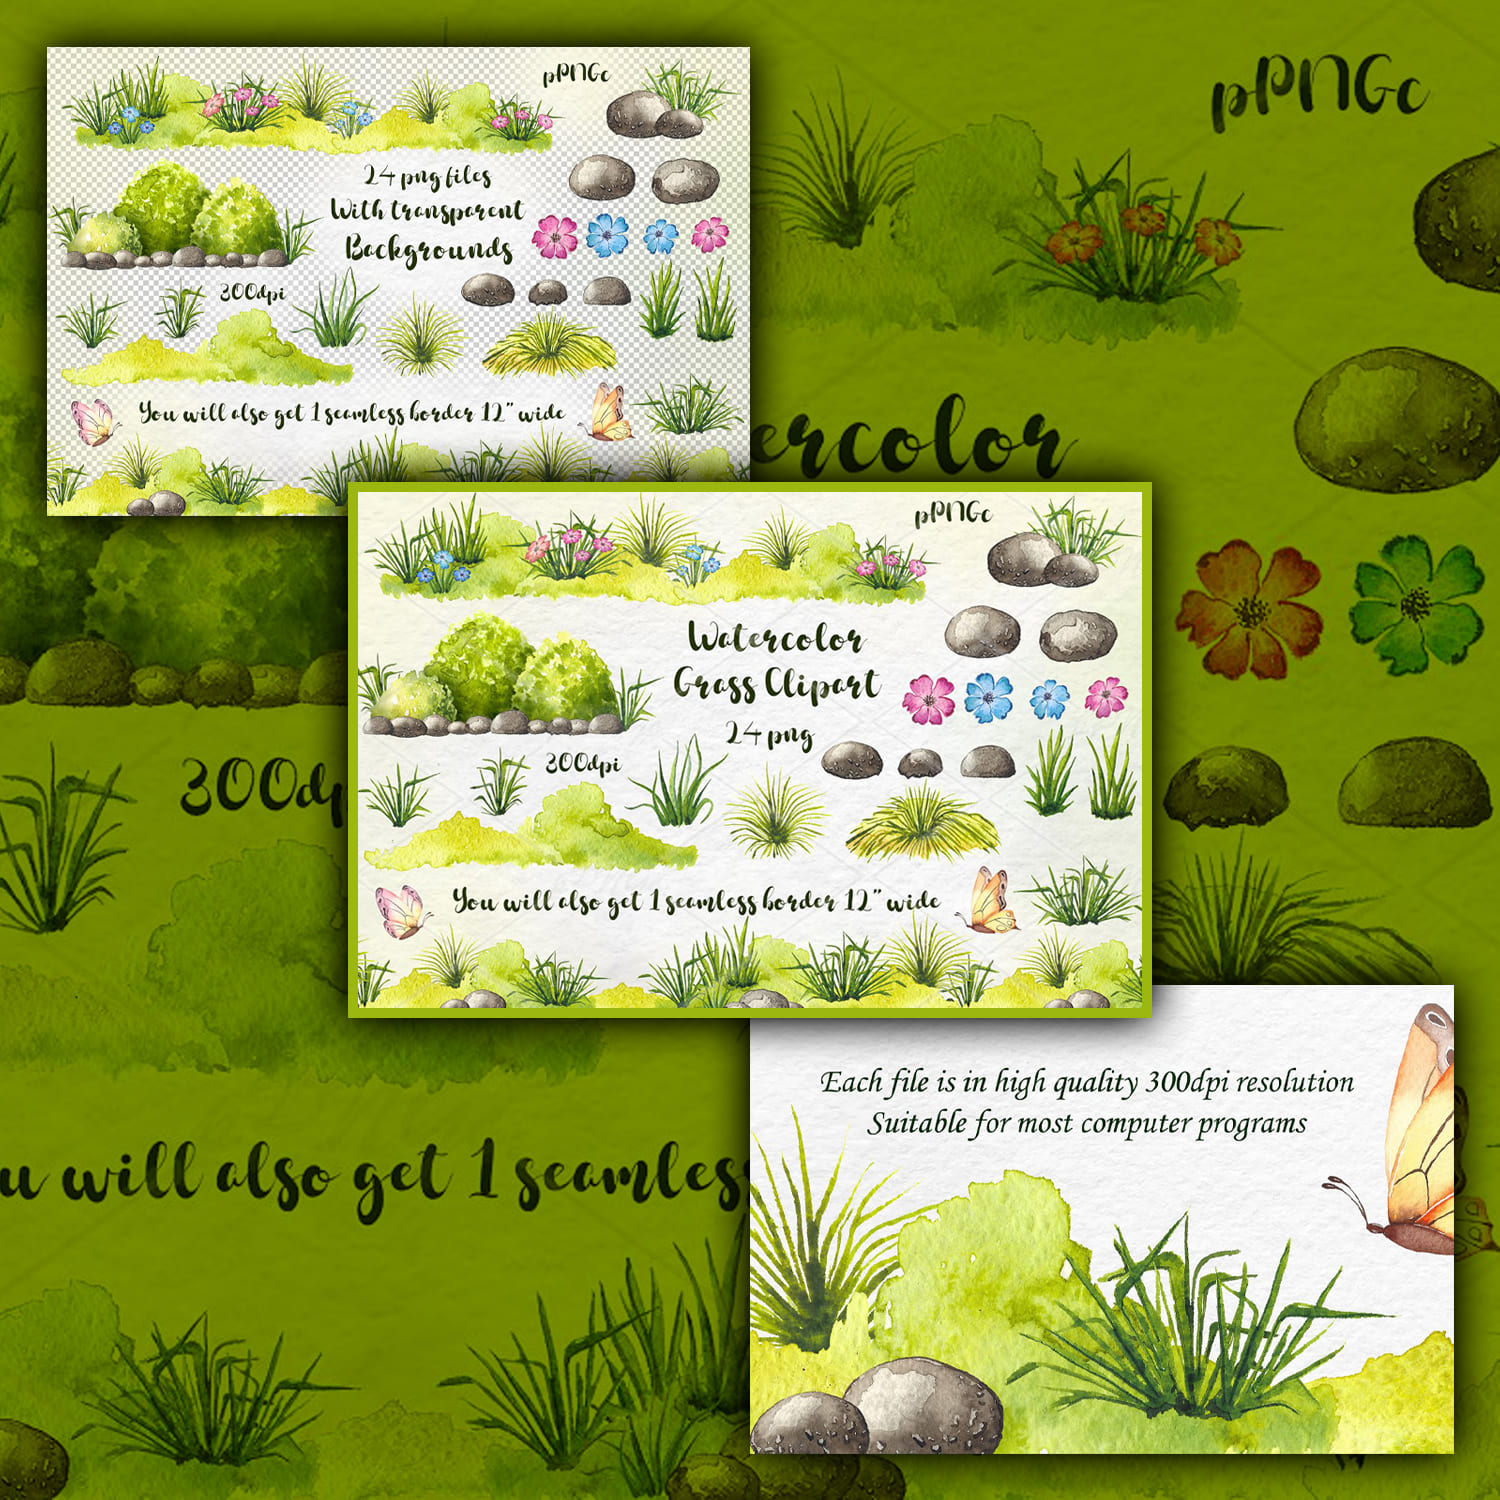 Watercolor Meadow/grass clipart cover.